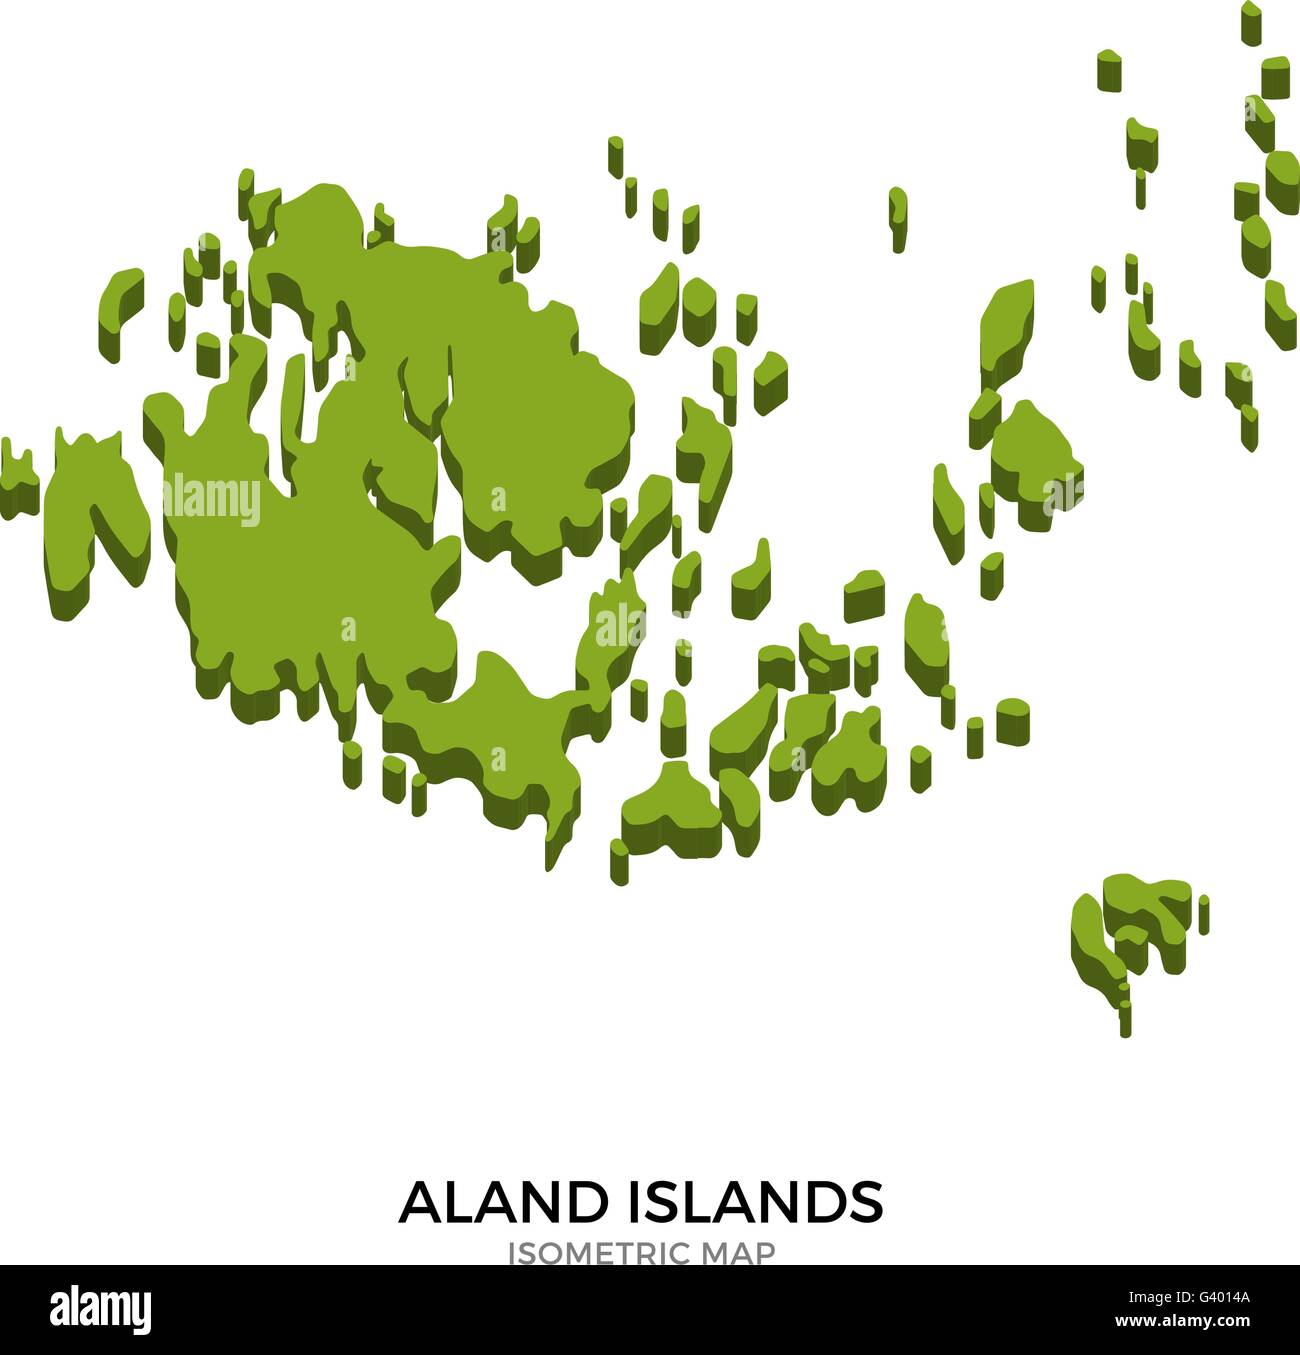 Isometric map of Aland Islands detailed vector illustration Stock Vector